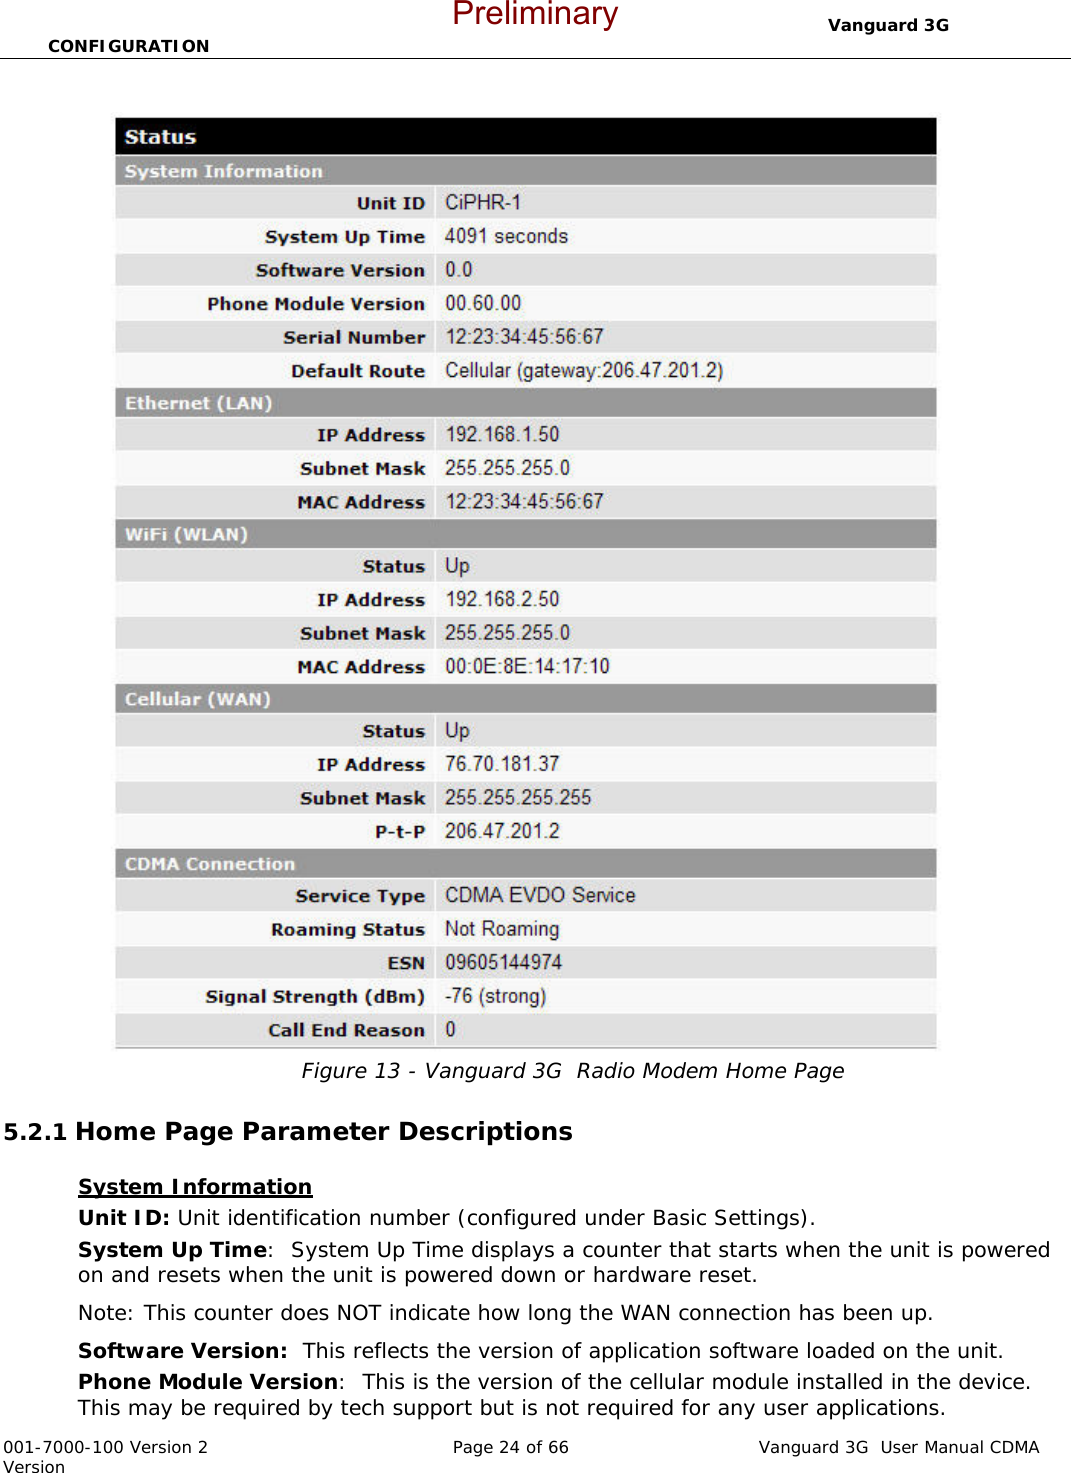                                  Vanguard 3G  CONFIGURATION  001-7000-100 Version 2       Page 24 of 66       Vanguard 3G  User Manual CDMA Version  Figure 13 - Vanguard 3G  Radio Modem Home Page  5.2.1 Home Page Parameter Descriptions  System Information  Unit ID: Unit identification number (configured under Basic Settings).  System Up Time:  System Up Time displays a counter that starts when the unit is powered on and resets when the unit is powered down or hardware reset.   Note: This counter does NOT indicate how long the WAN connection has been up.  Software Version:  This reflects the version of application software loaded on the unit.  Phone Module Version:  This is the version of the cellular module installed in the device.  This may be required by tech support but is not required for any user applications.    Preliminary